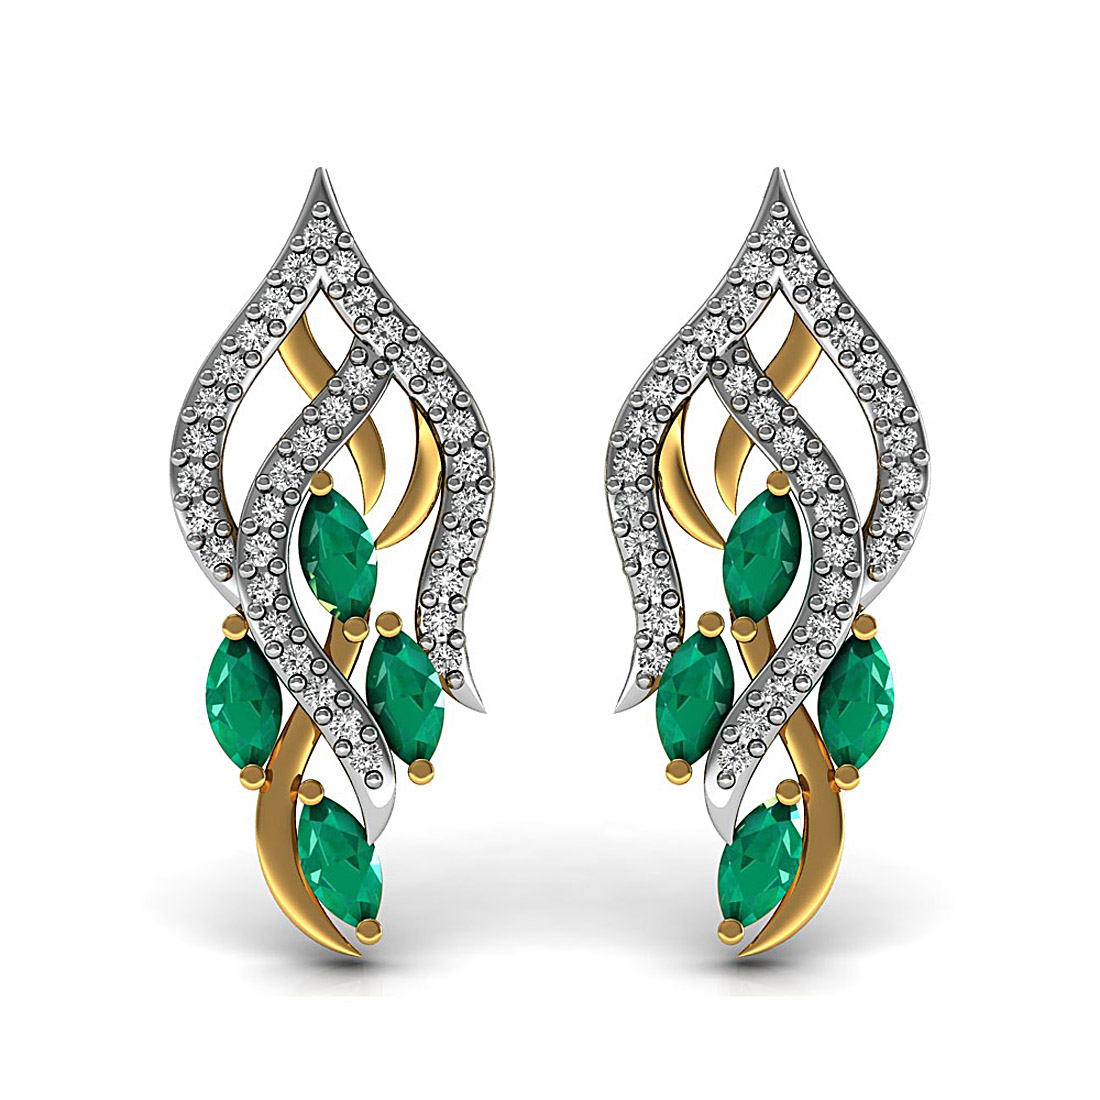 18K Solid yellow gold flower stud earrings studded with natural emerald and genuine diamond.